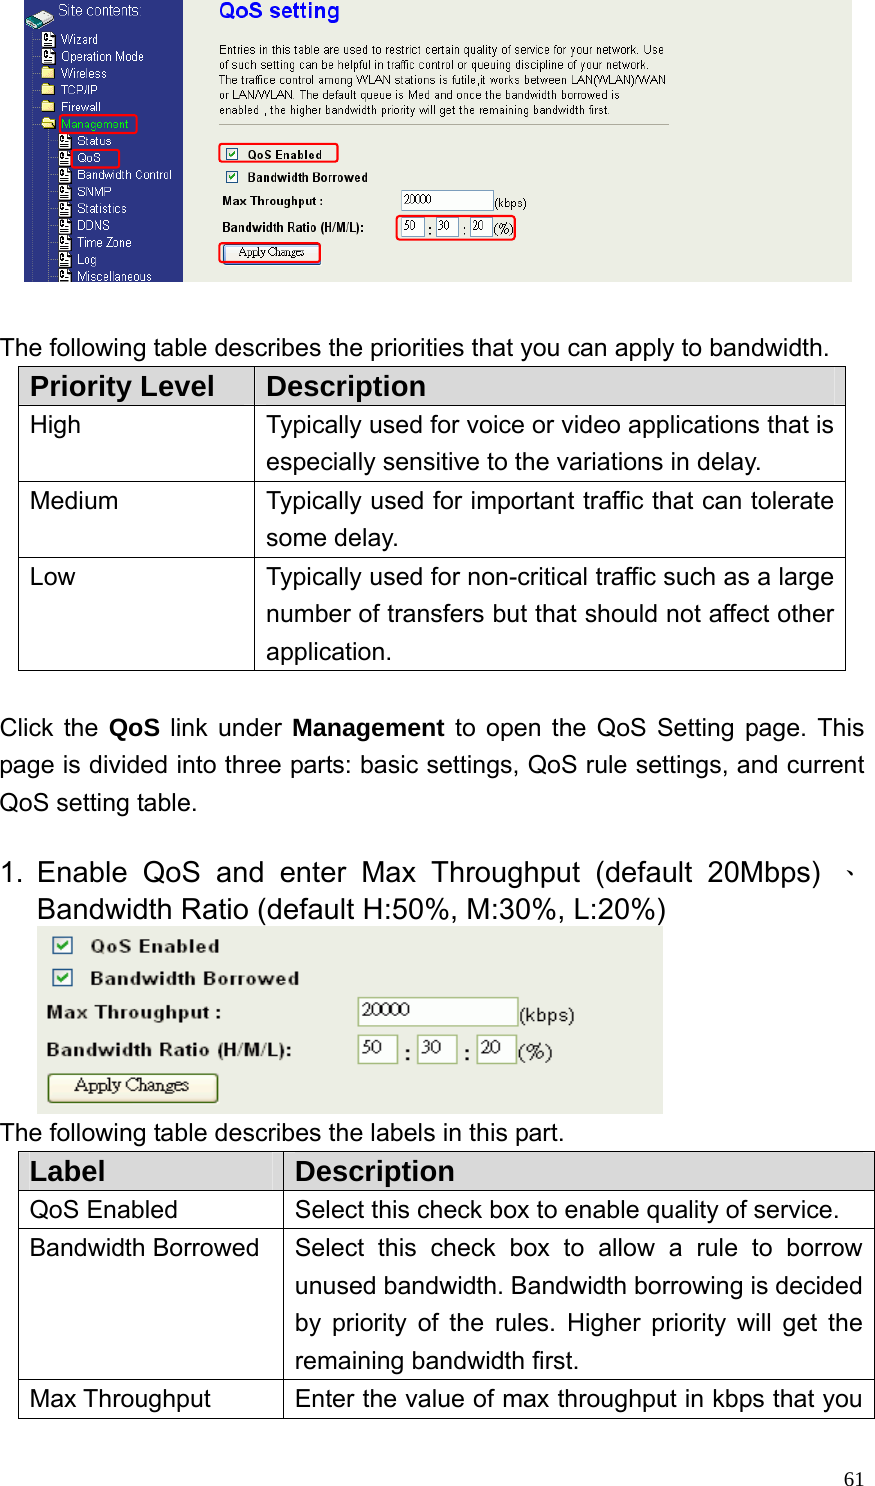  61  The following table describes the priorities that you can apply to bandwidth. Priority Level  Description High  Typically used for voice or video applications that is especially sensitive to the variations in delay. Medium  Typically used for important traffic that can tolerate some delay. Low  Typically used for non-critical traffic such as a large number of transfers but that should not affect other application.  Click the QoS link under Management to open the QoS Setting page. This page is divided into three parts: basic settings, QoS rule settings, and current QoS setting table.  1. Enable QoS and enter Max Throughput (default 20Mbps) 、Bandwidth Ratio (default H:50%, M:30%, L:20%)  The following table describes the labels in this part. Label  Description QoS Enabled  Select this check box to enable quality of service. Bandwidth Borrowed  Select this check box to allow a rule to borrow unused bandwidth. Bandwidth borrowing is decided by priority of the rules. Higher priority will get the remaining bandwidth first. Max Throughput  Enter the value of max throughput in kbps that you 